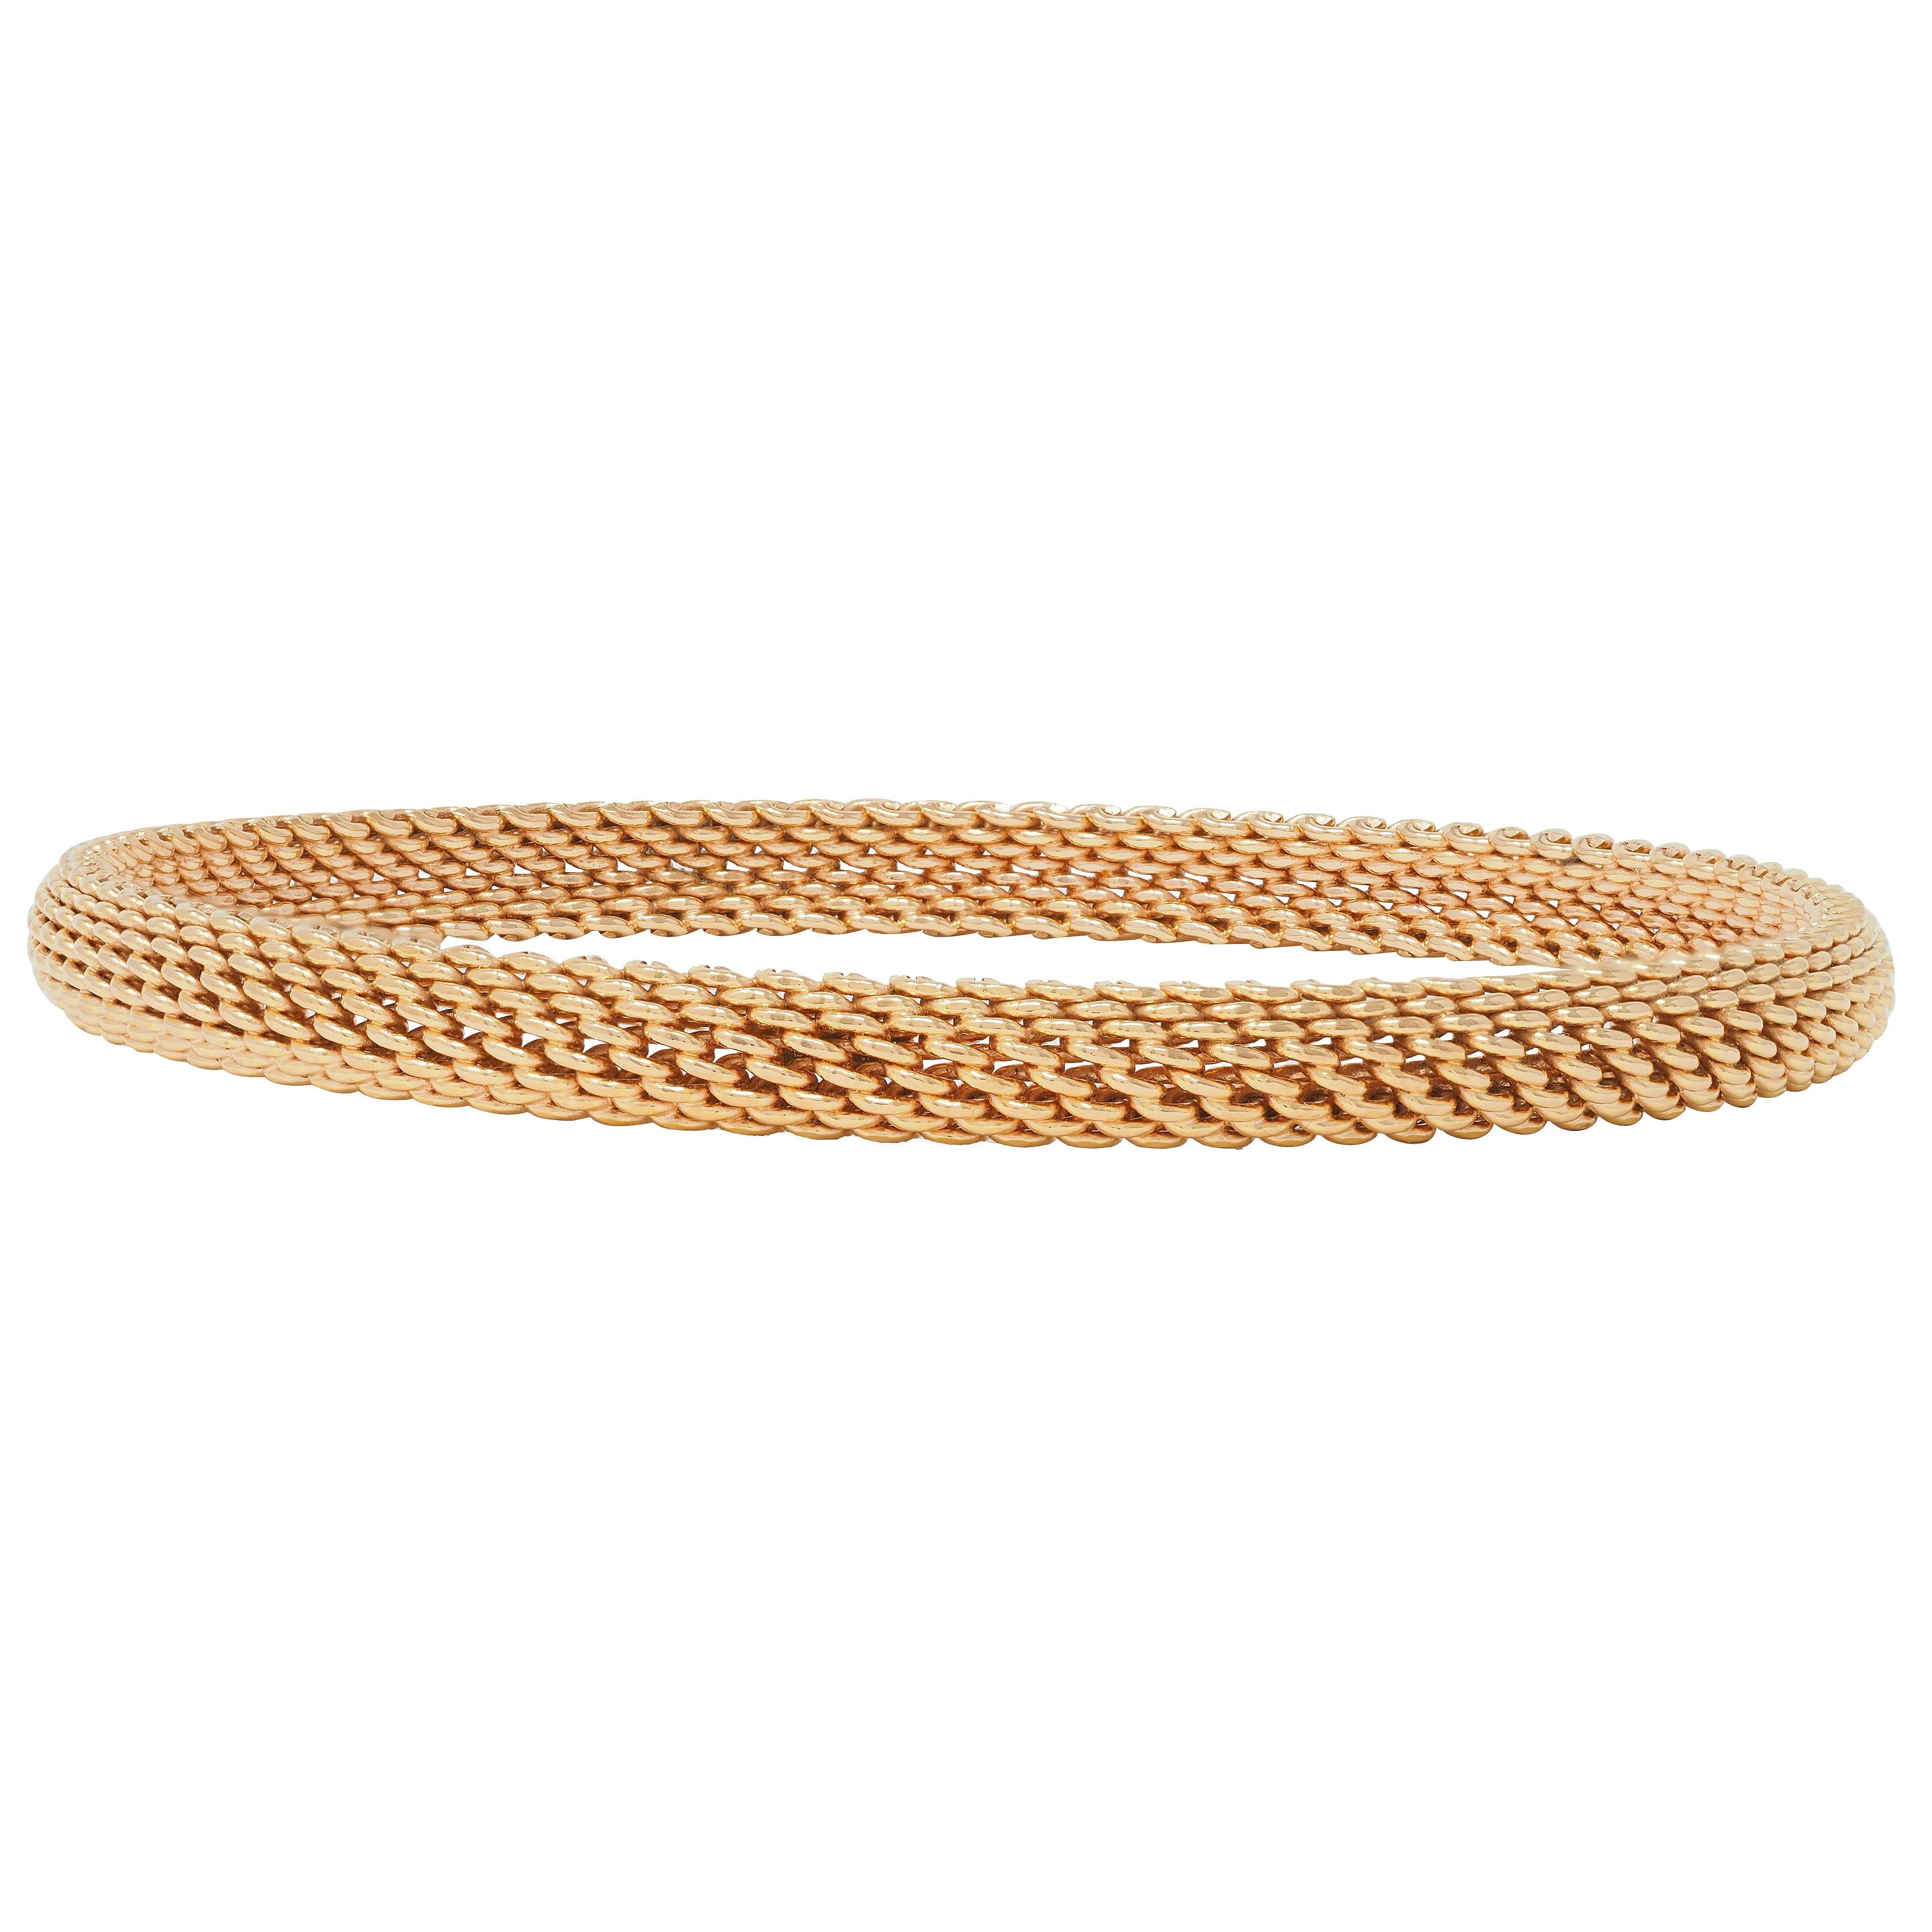 Designed as a curved bangle comprised of woven rose gold
Meshed with limited flexibility
Stamped for 18 karat gold
With maker's mark for Tiffany & Co. 
Circa: 2000s; via the Somerset collection
Width: 1/4 inch
Bracelet size: 7 1/2 inch circumference